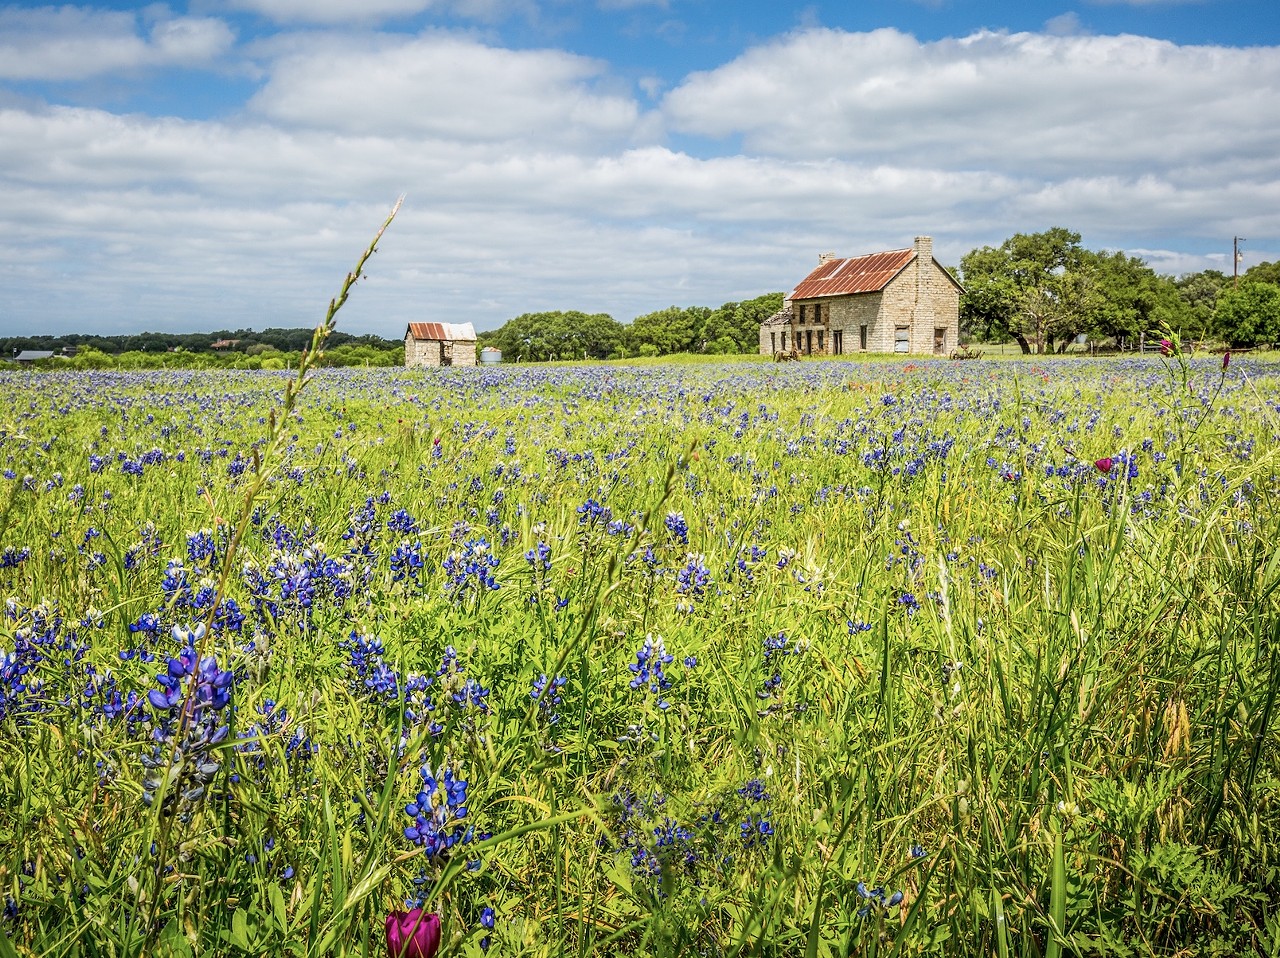 Marble Falls
About a 1.5 hour drive north of San Antonio
This Hill Country town is a great weekend getaway for those who like cute outdoor activities. From berry farms to the town's fields full of bluebonnets, this picturesque town is something you have to see to believe, especially during the spring.